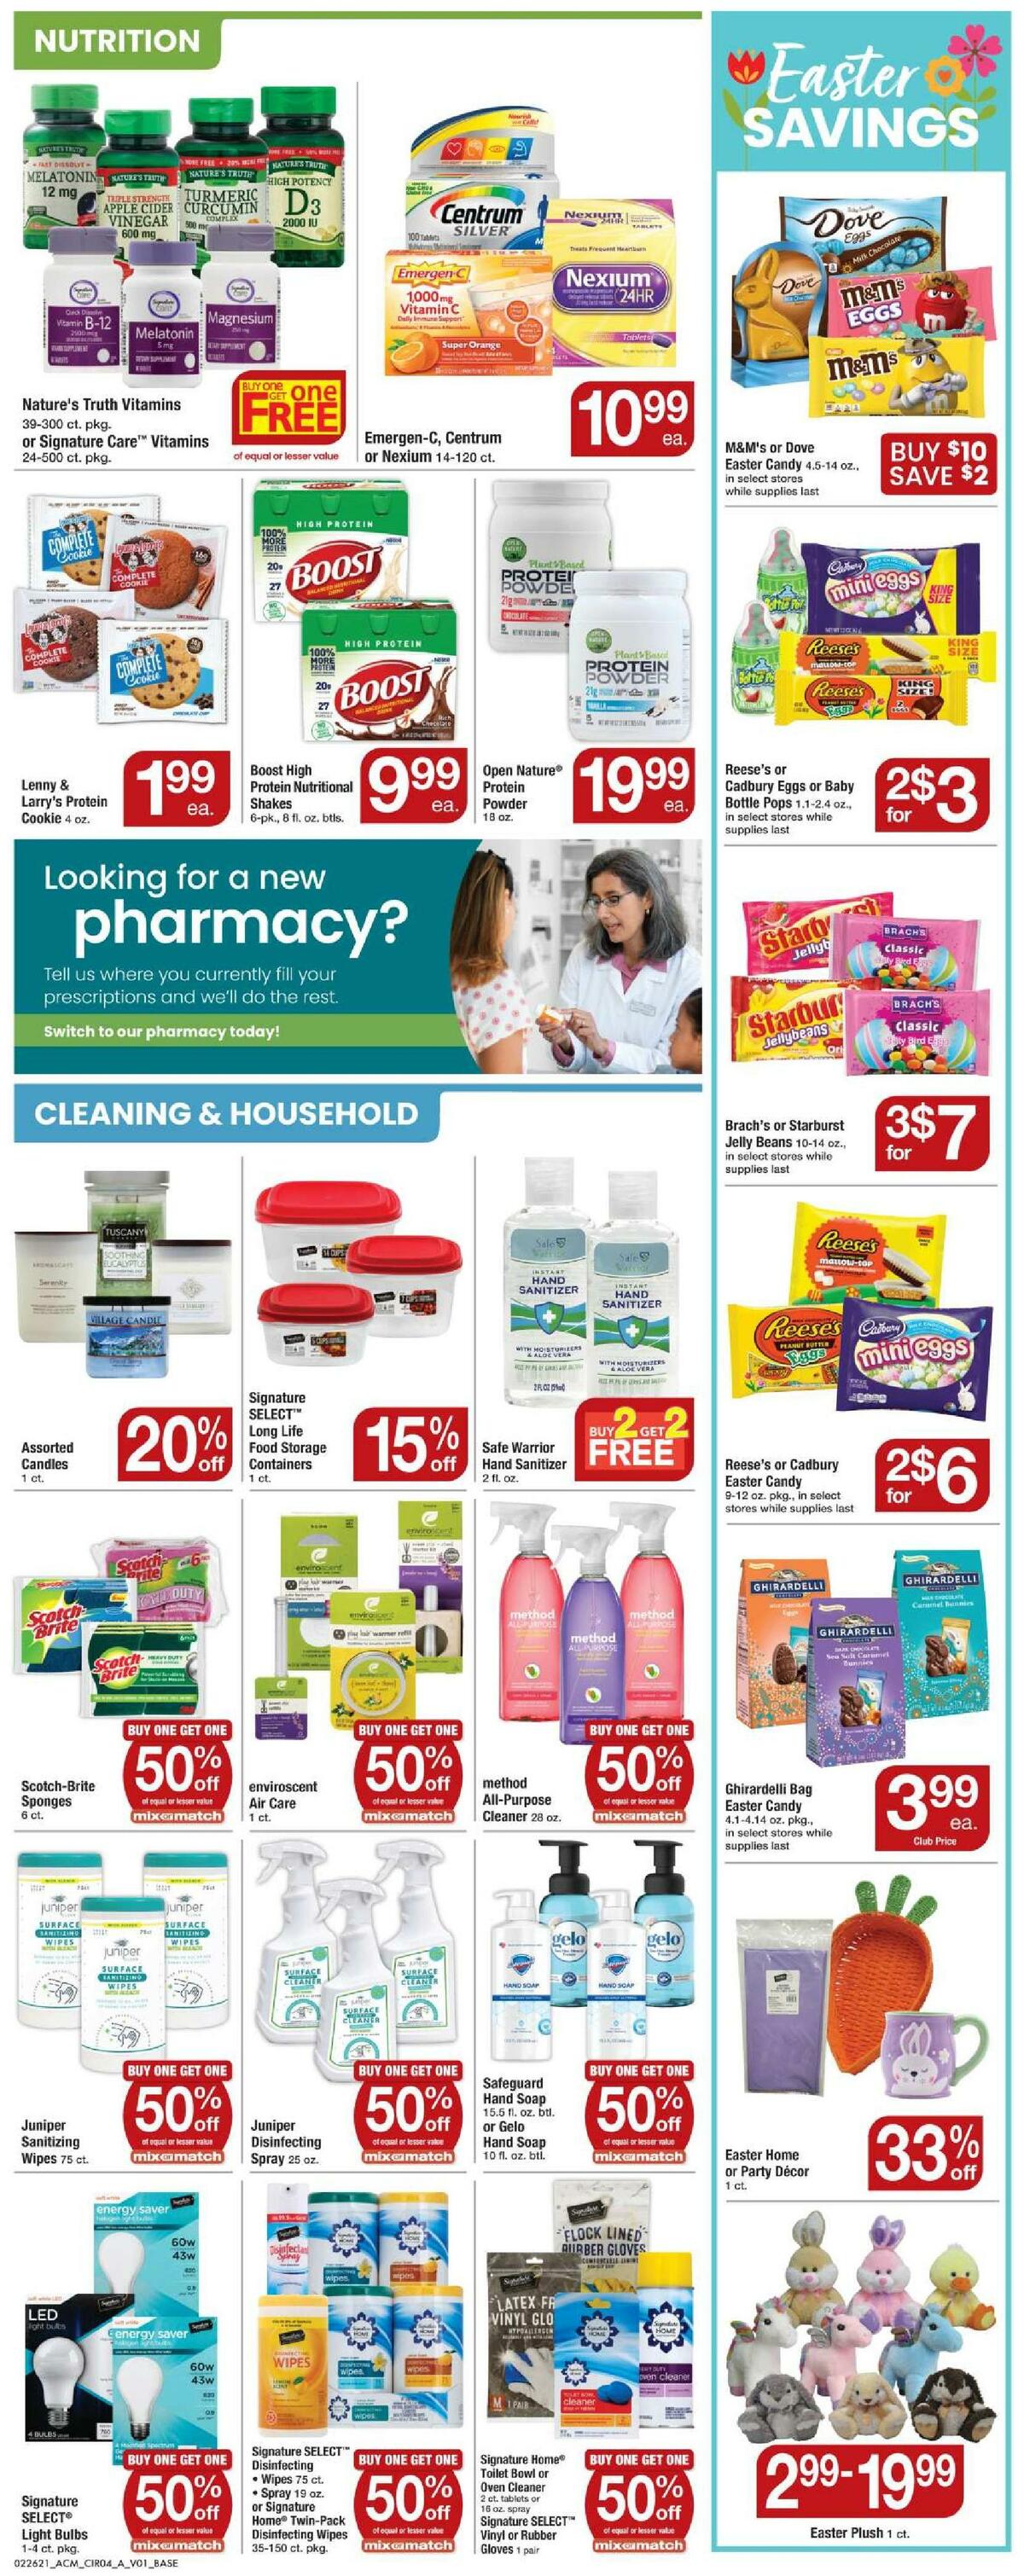 ACME Markets Weekly Ad from February 26